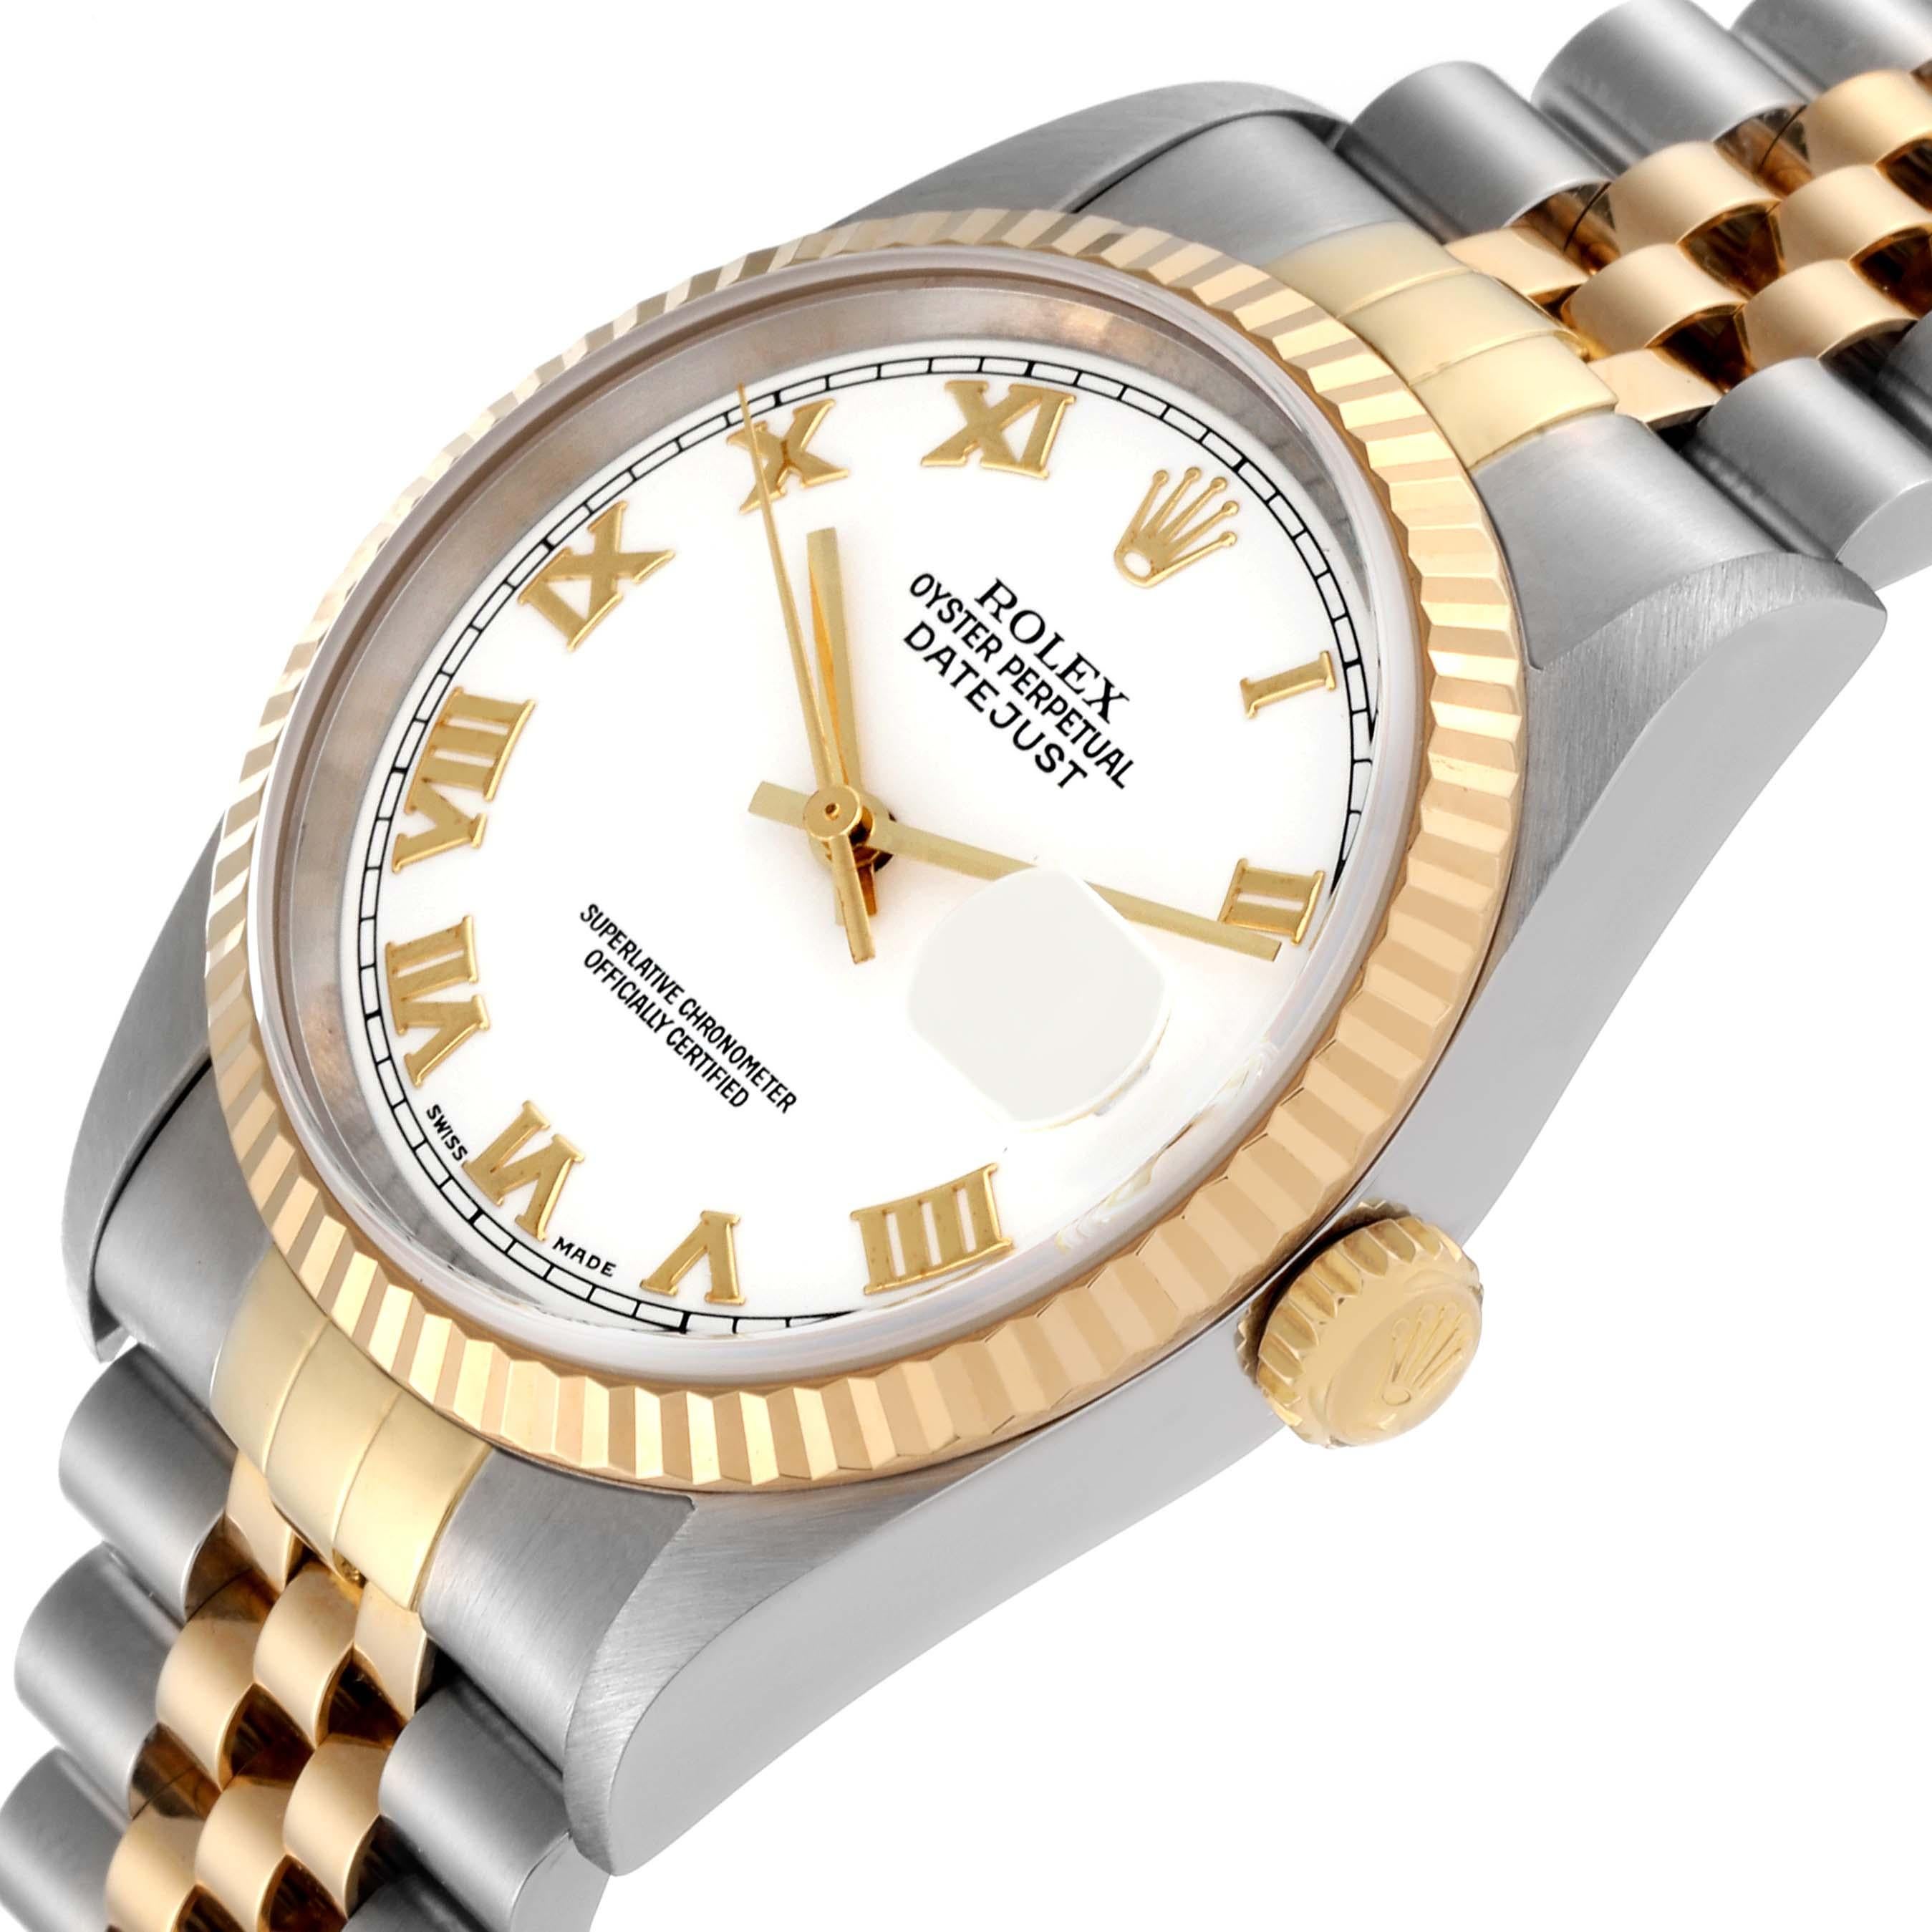 Rolex Datejust Steel Yellow Gold White Dial Mens Watch 16233 2